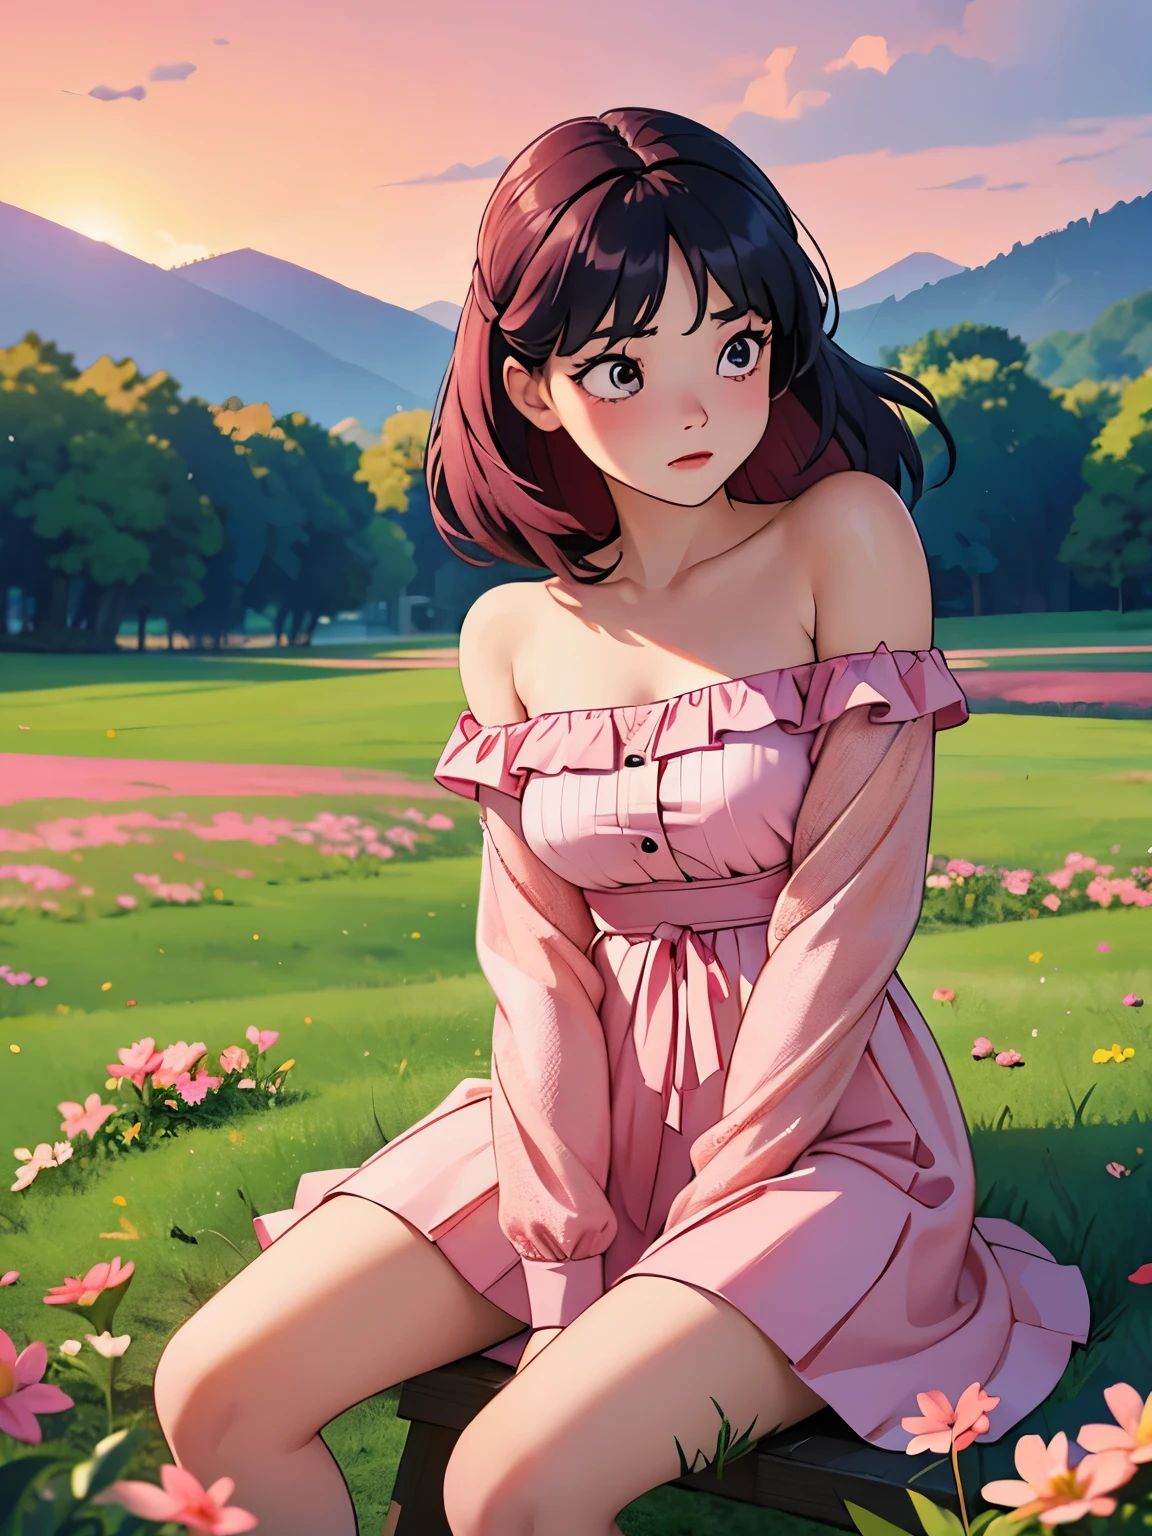 single korean woman, Age 28, Folded seats, Sitting in the middle of the meadow, The wind is blowing, Evening, Sad scene, Pink sky, Close-up photo, Off shoulder dress